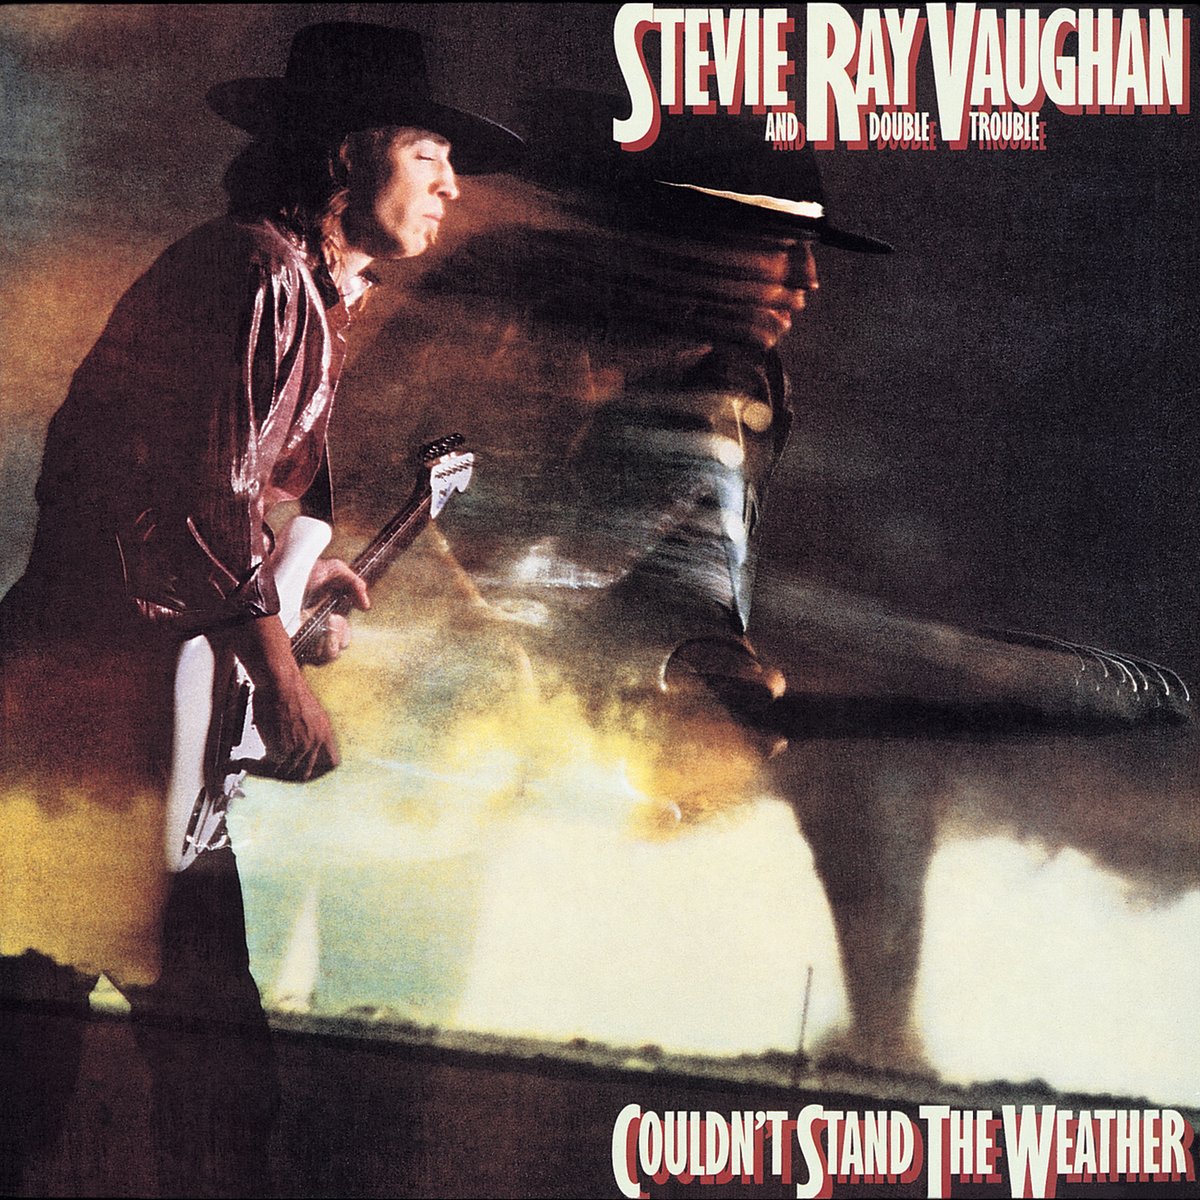 40 years ago today, Stevie Ray Vaughan & Double Trouble released their classic second album, 'Couldn't Stand the Weather.' tidal.link/4bw2PkM